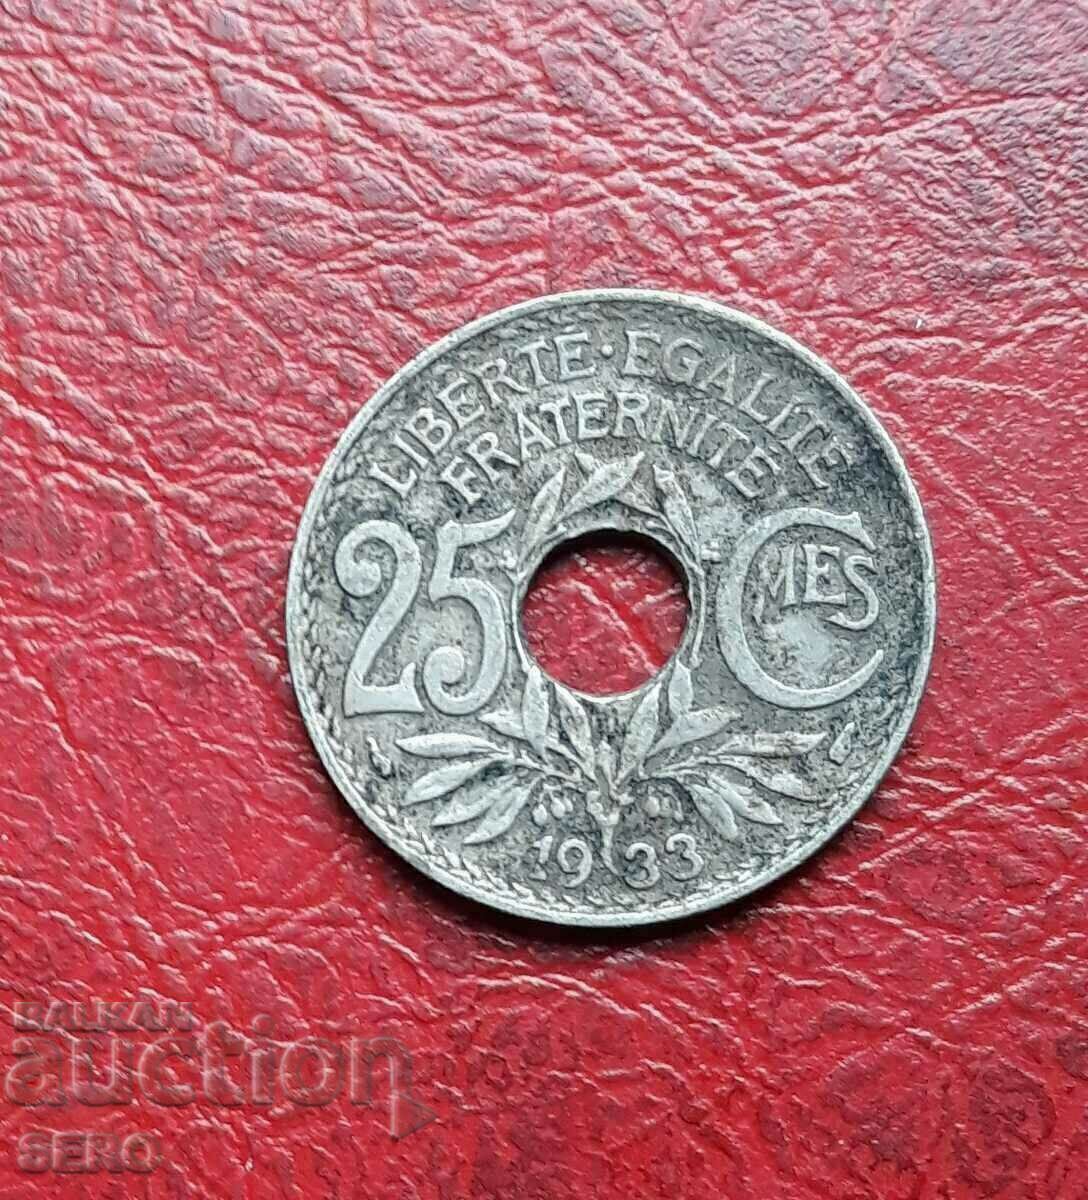 France-25 cents 1933